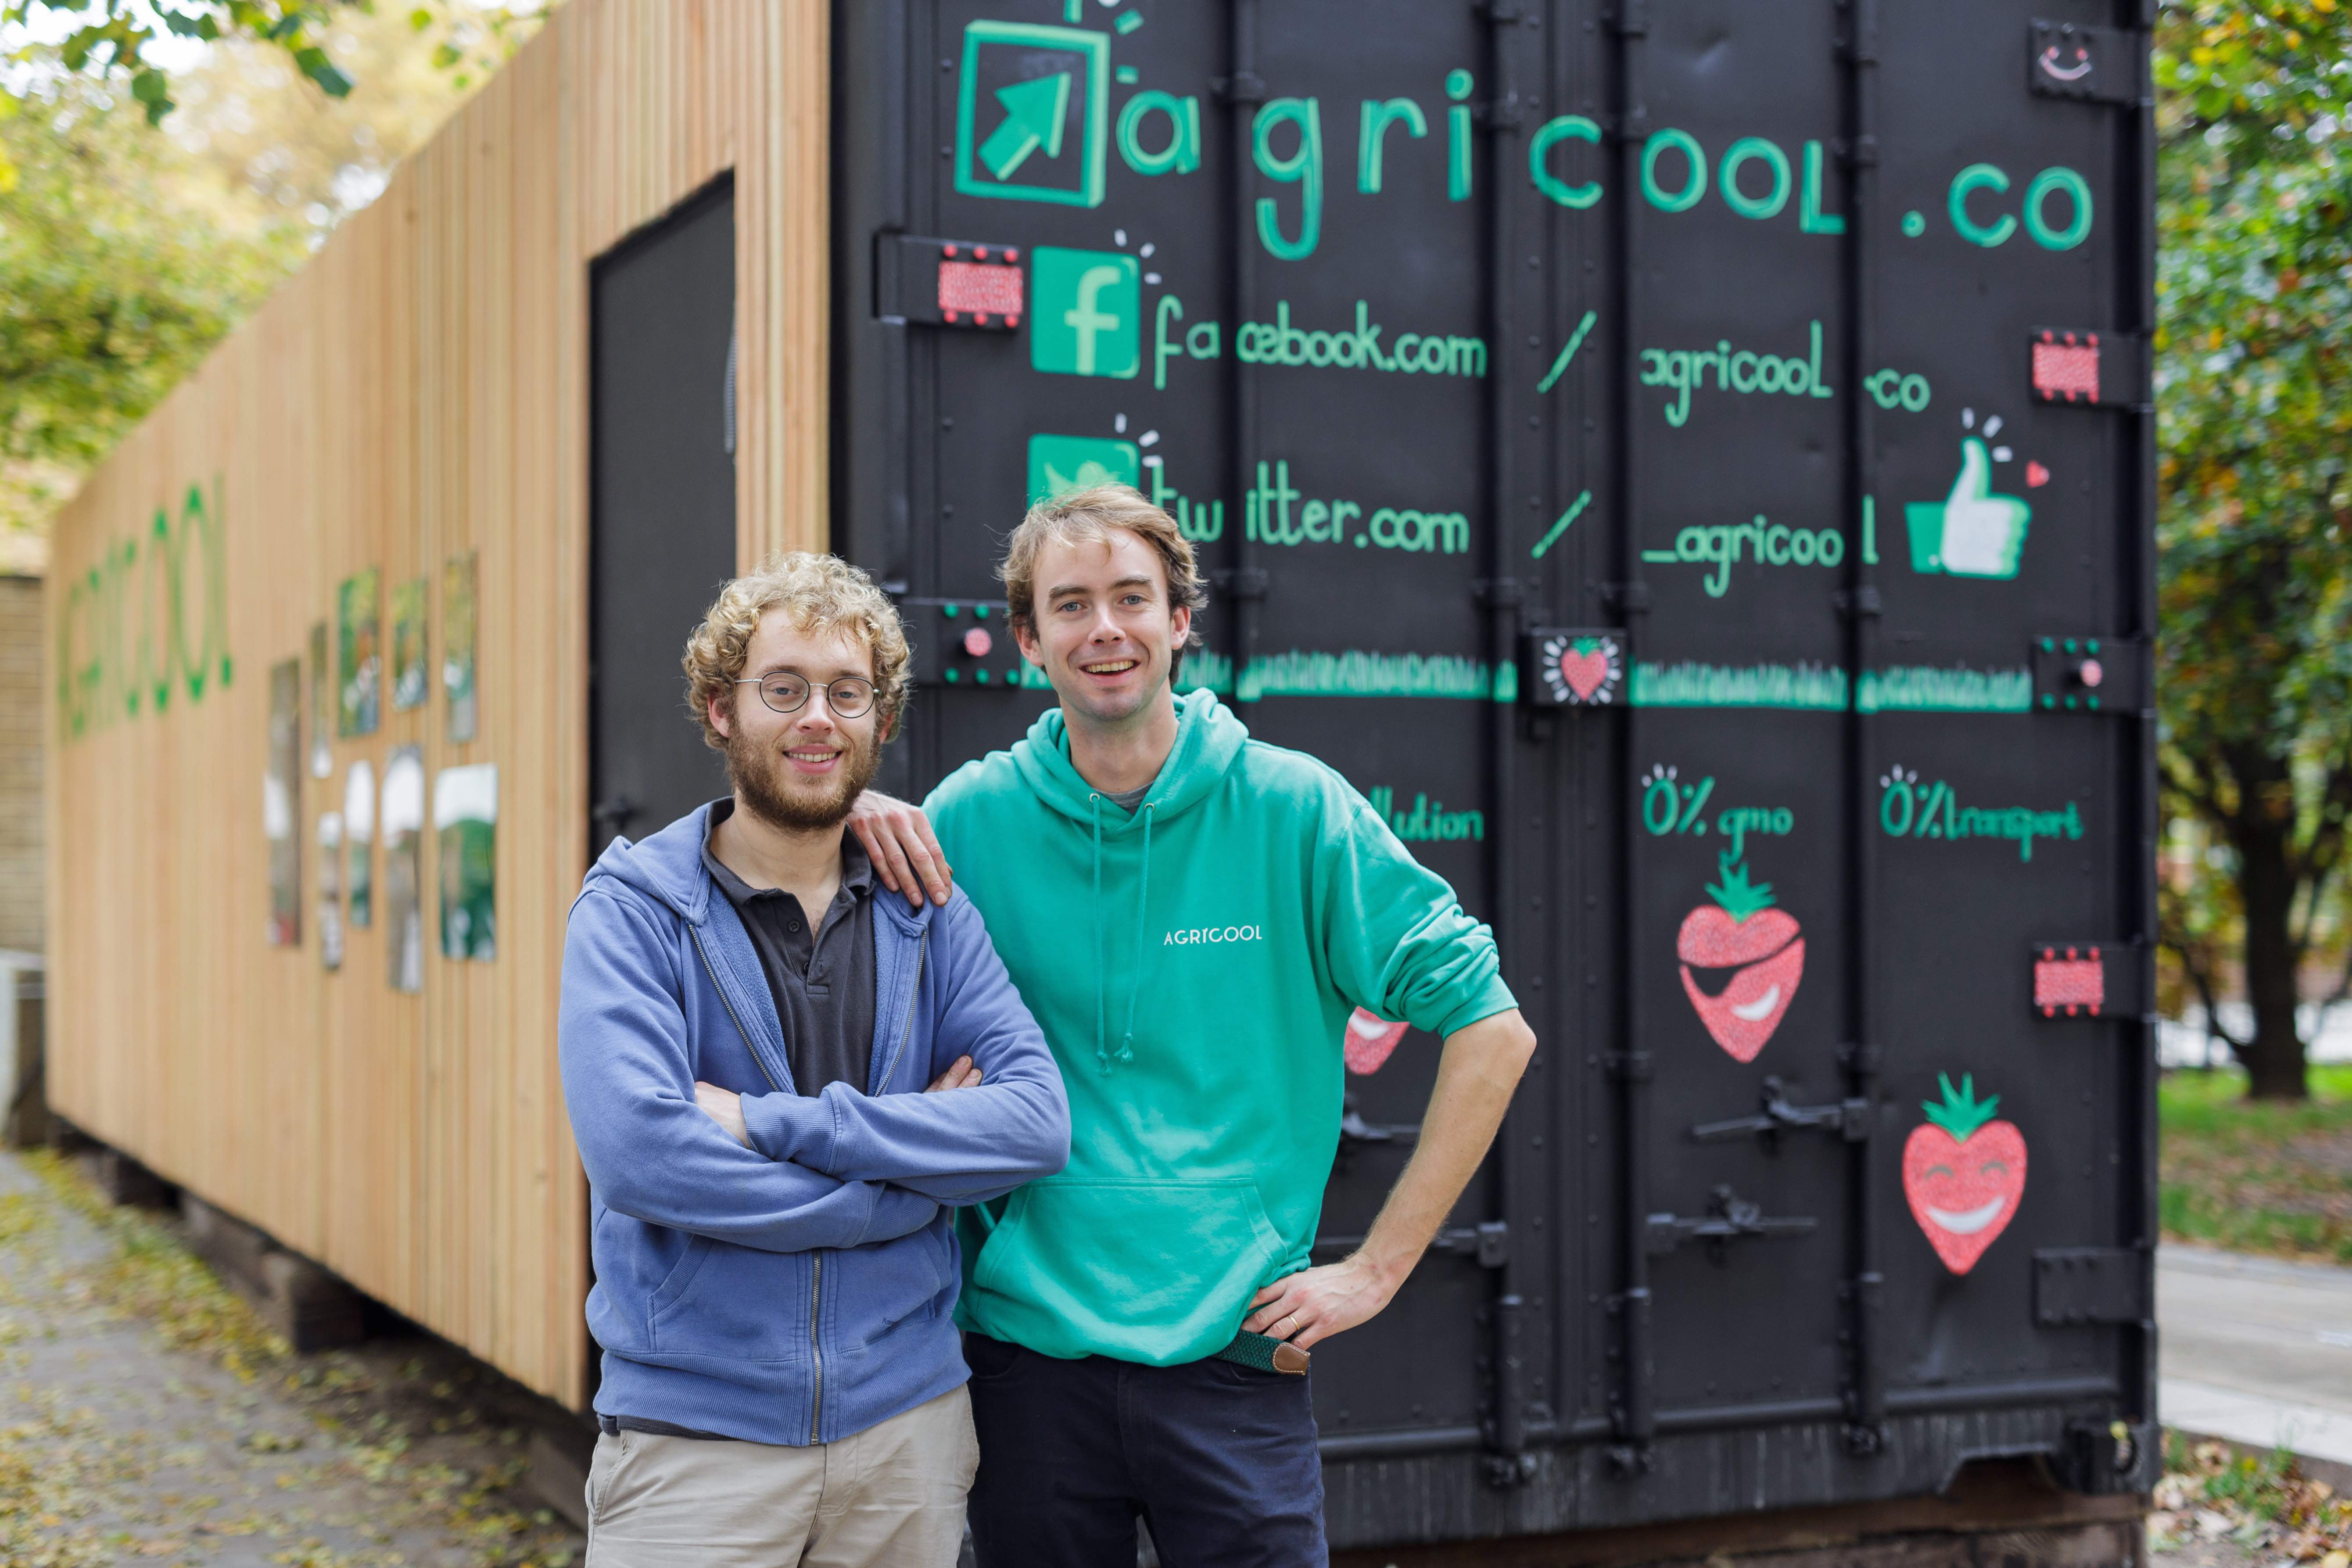 The farmers' sons invented a system that lets them grow tasty fruits and vegetables locally and without pesticides, at a price that everyone can afford.